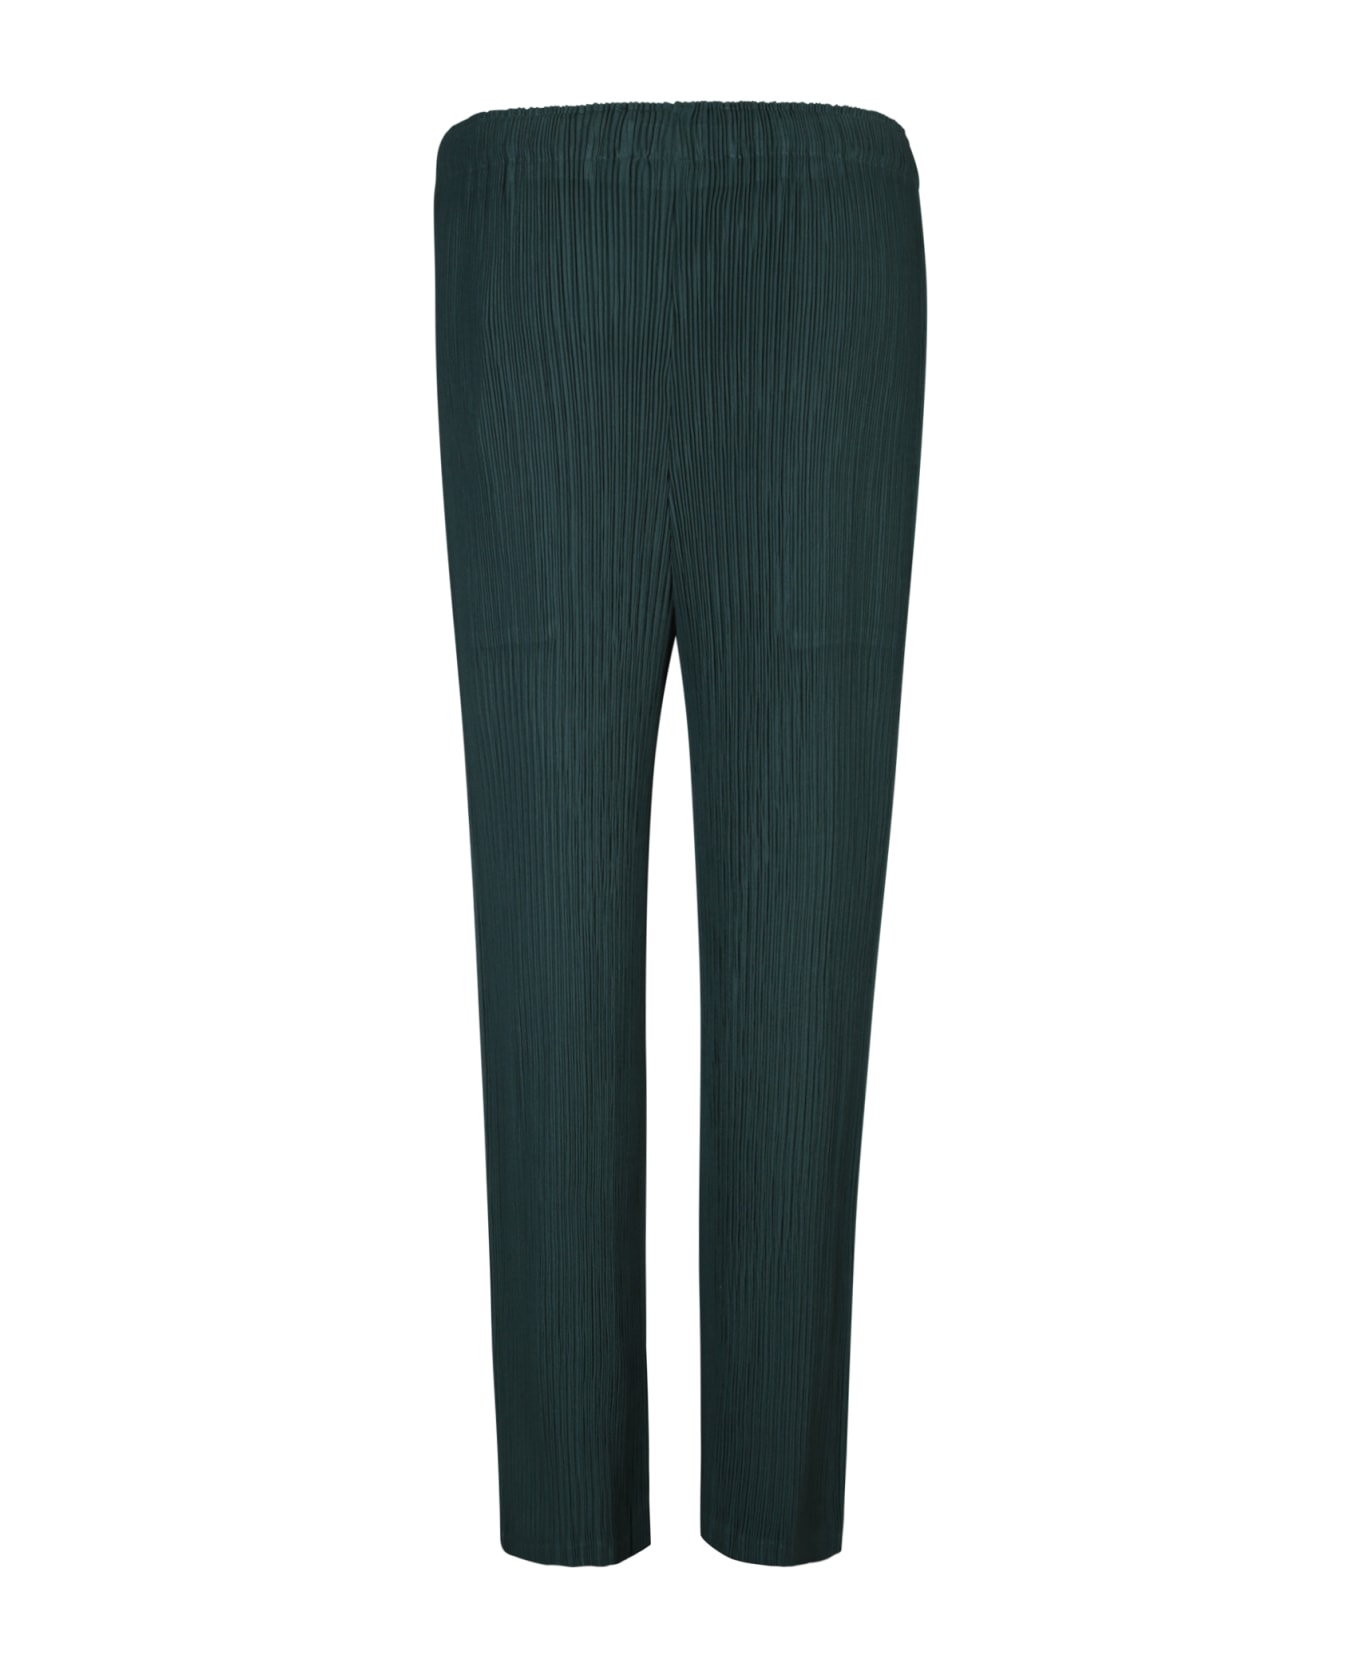 Issey Miyake Pleated Green Straight Trousers - Green ボトムス